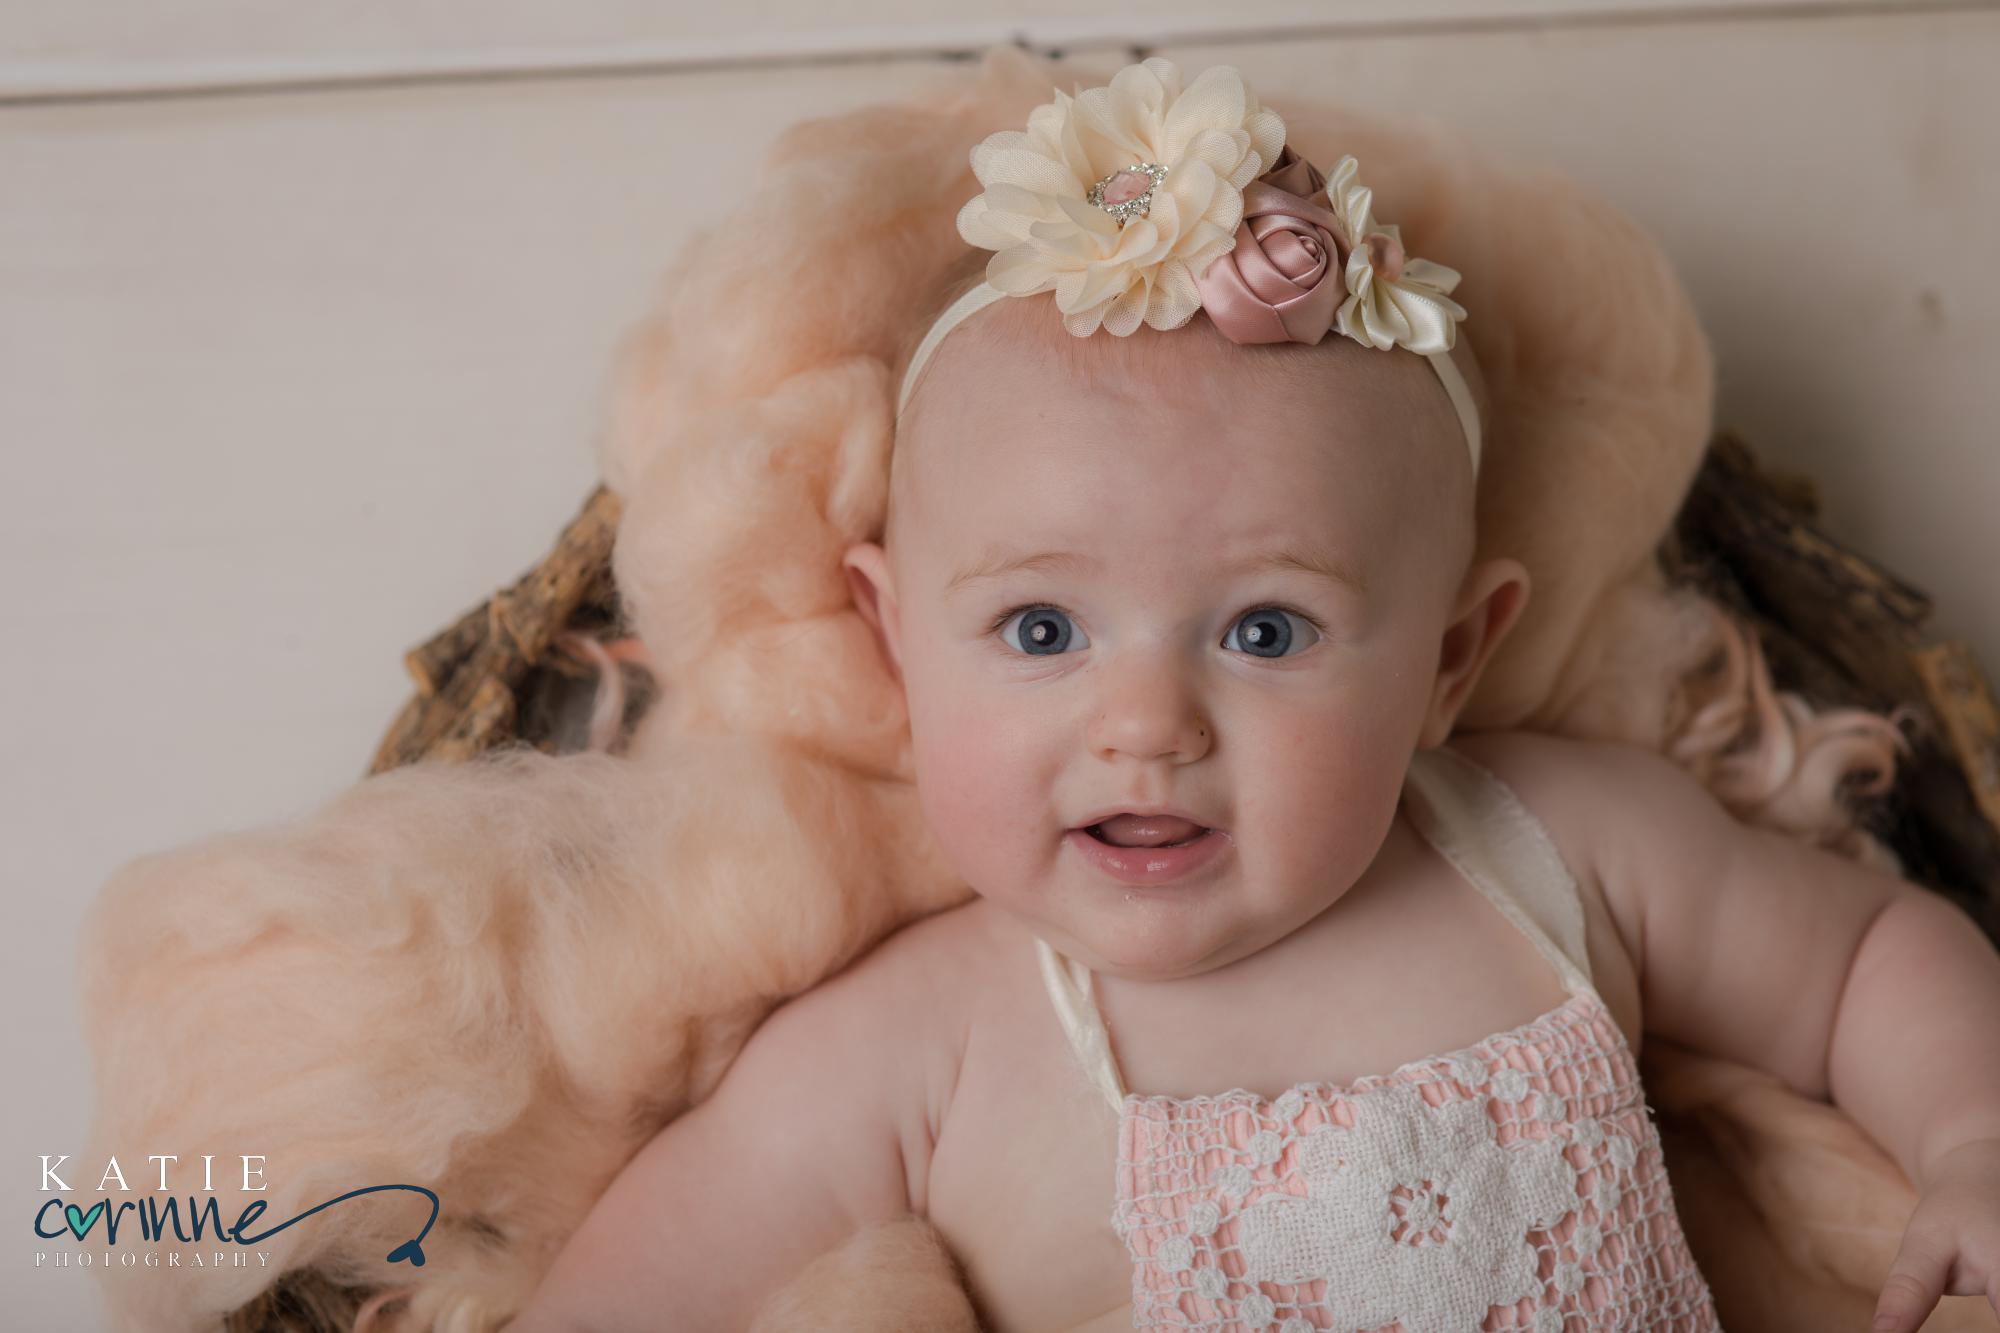 6 month old baby with bow on head